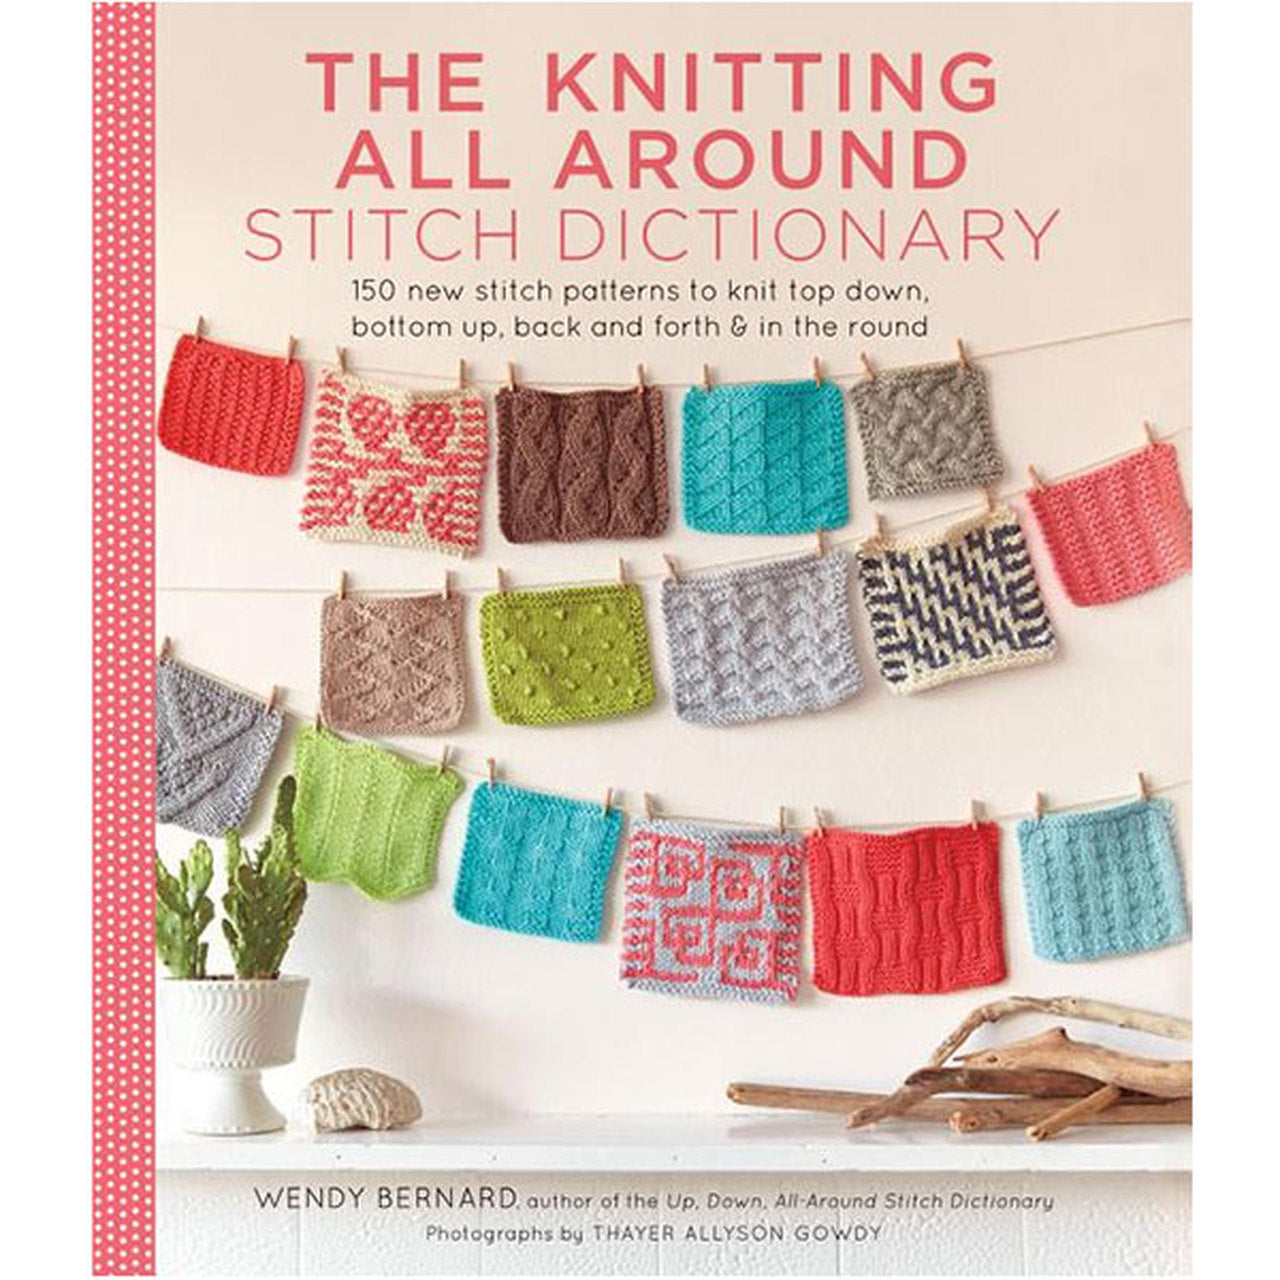 Knitting All Around Stitch Dictionary book cover